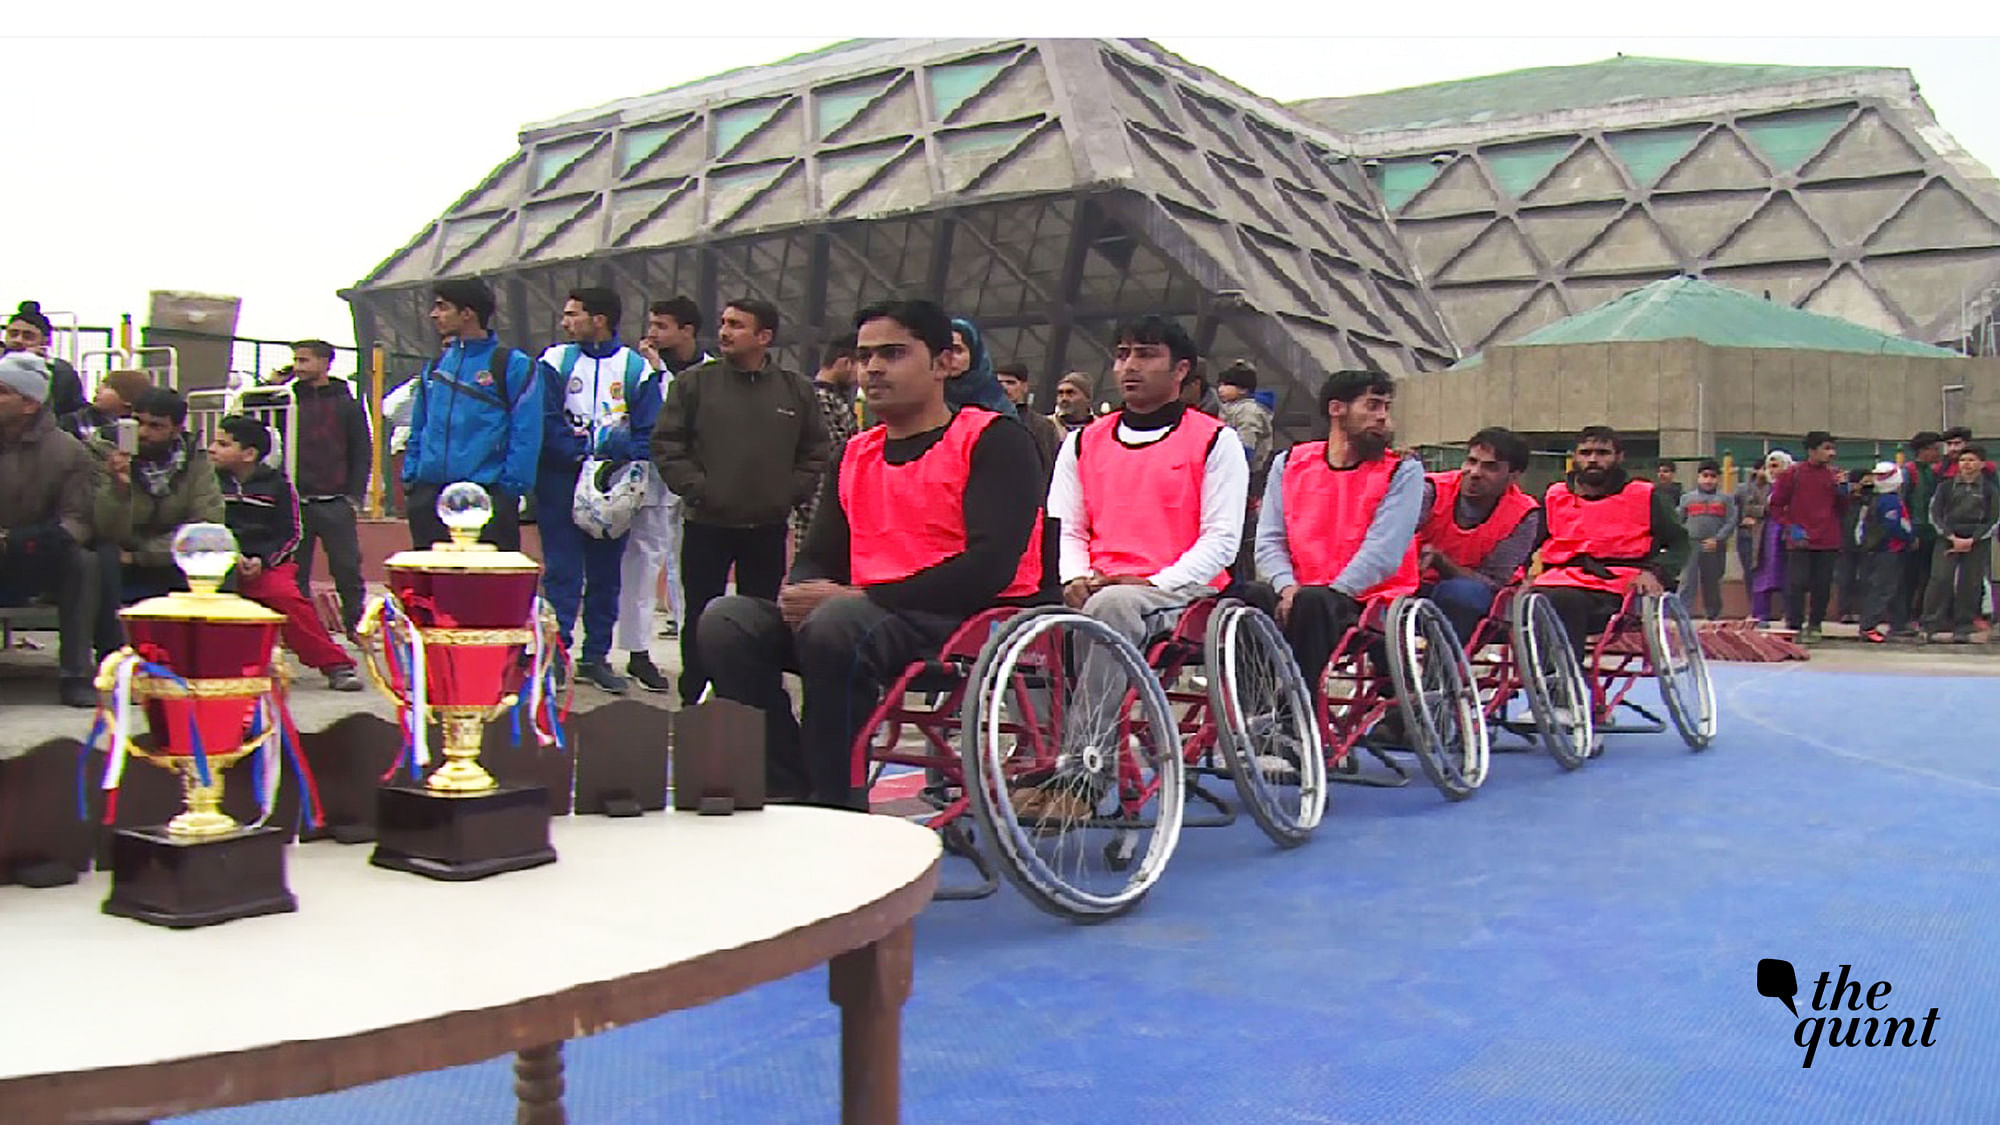 Kashmir’s basketball team battling depression and disability one dibble at a time.